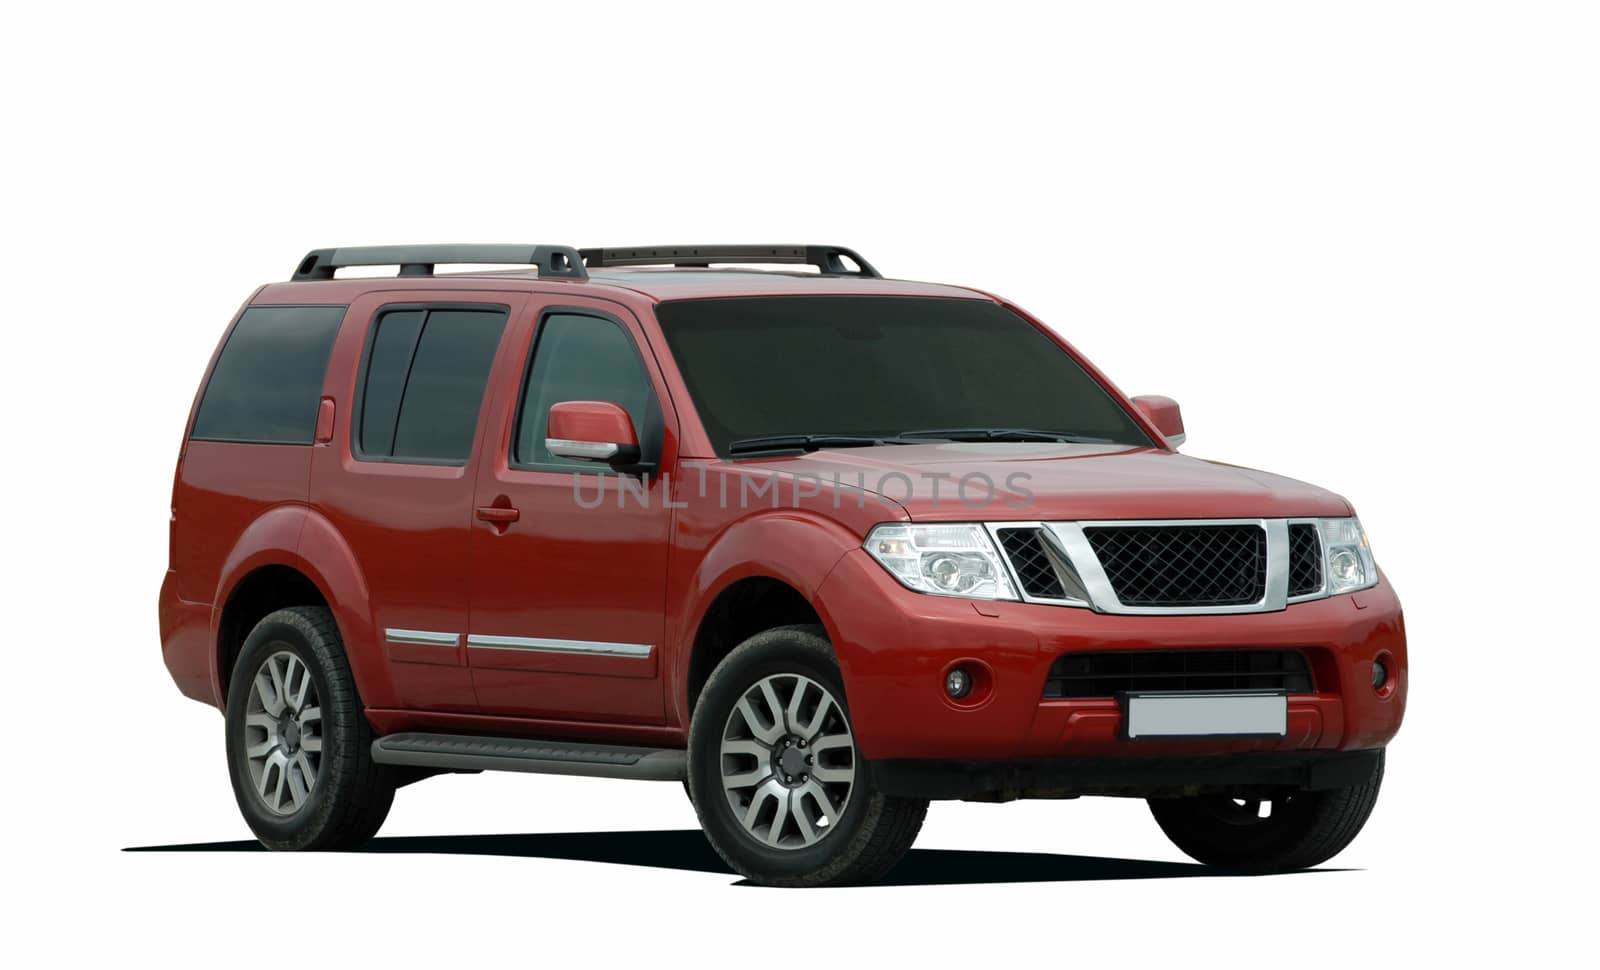 red large SUV on a white background